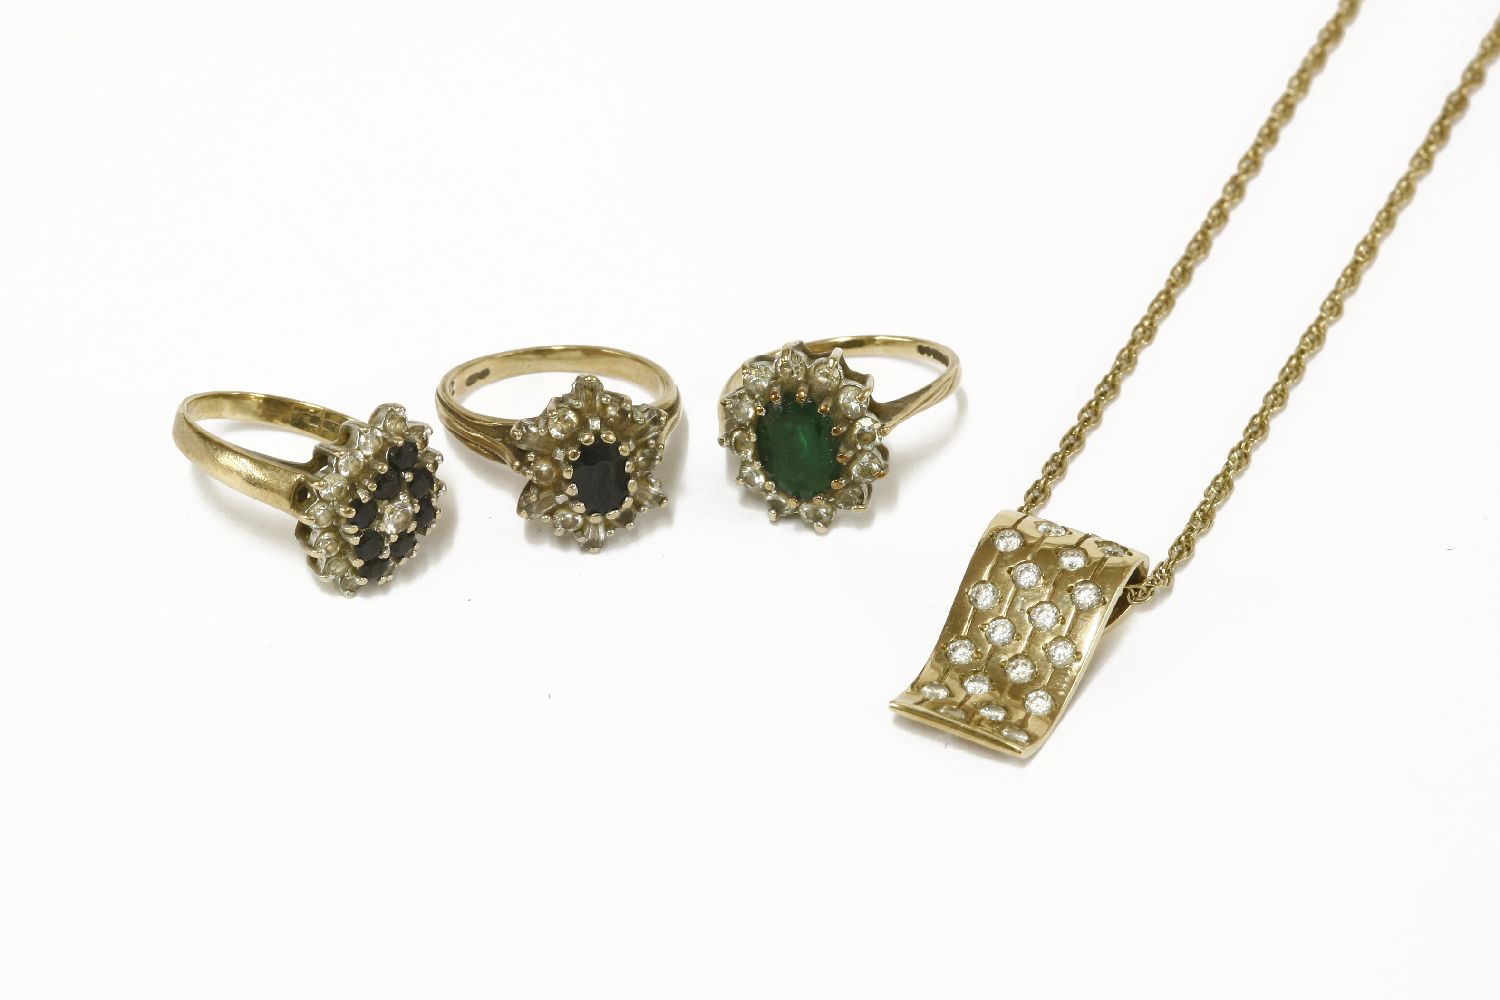 A 9ct gold sapphire and white stone ring, a 9ct gold green and cubic zirconia stone cluster ring,